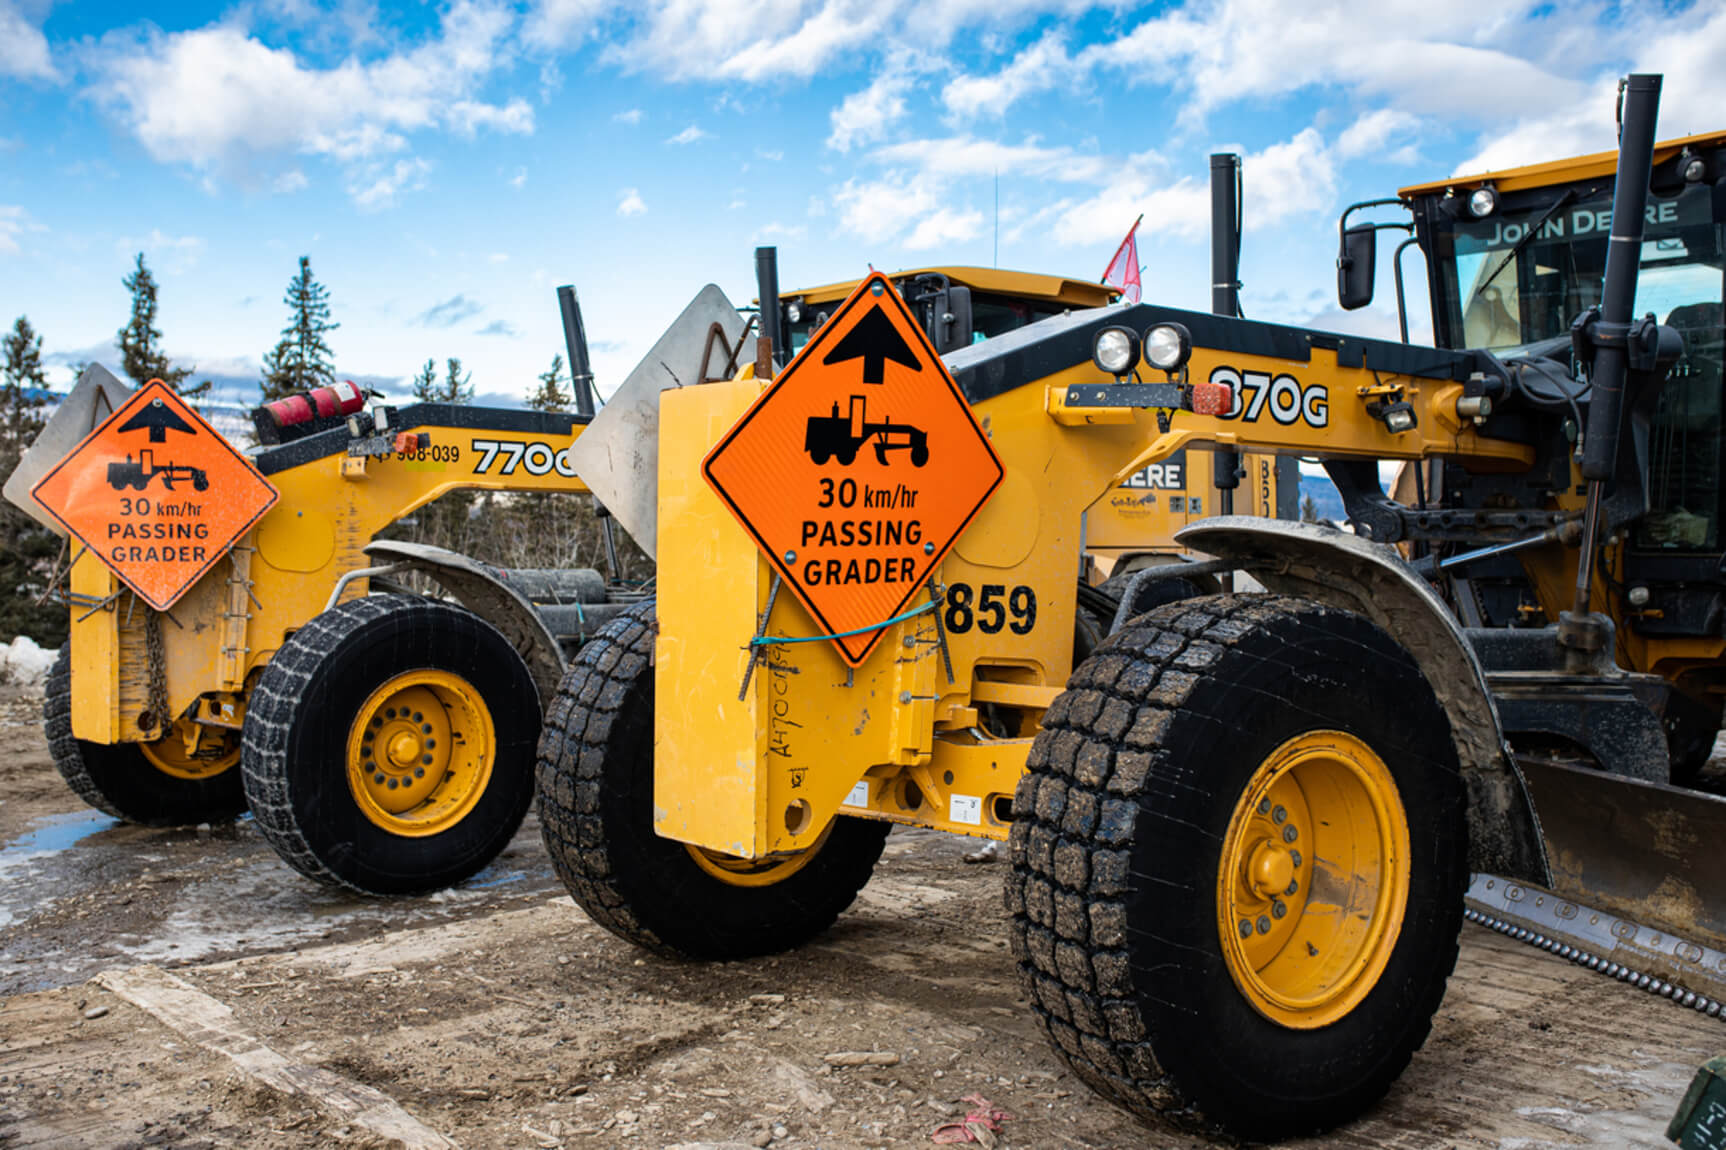 Noble Enterprises has road brishing attachments for our graders to help clear roads that have grown over.